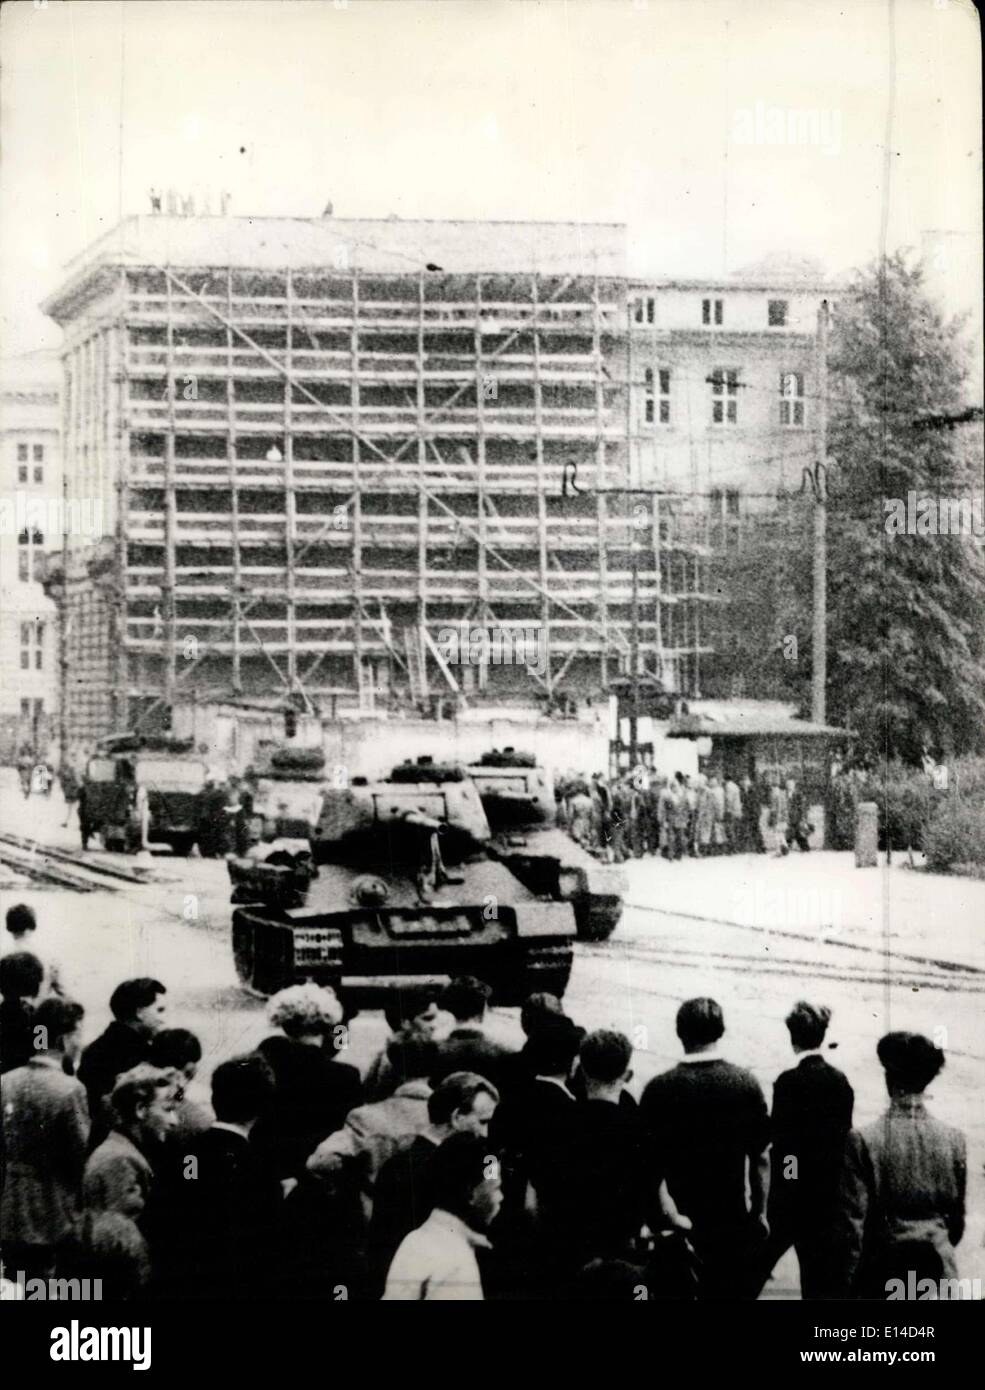 Apr. 17, 2012 - Soviet tanks against East Berlin demonstrators. On Wednesday, June 17th, 1953, the Russians went into action against Berlin workmen residing in the East zone of Berlin who had taken part in the demonstrations. When the Iron monsters crossed the main squares of the city where thousands of demonstrators had assembled in order to protest against the East German regime, the tank-crews were ''welcomed'' with roaring ''Fie! Shame on you!'' cries. Stock Photo